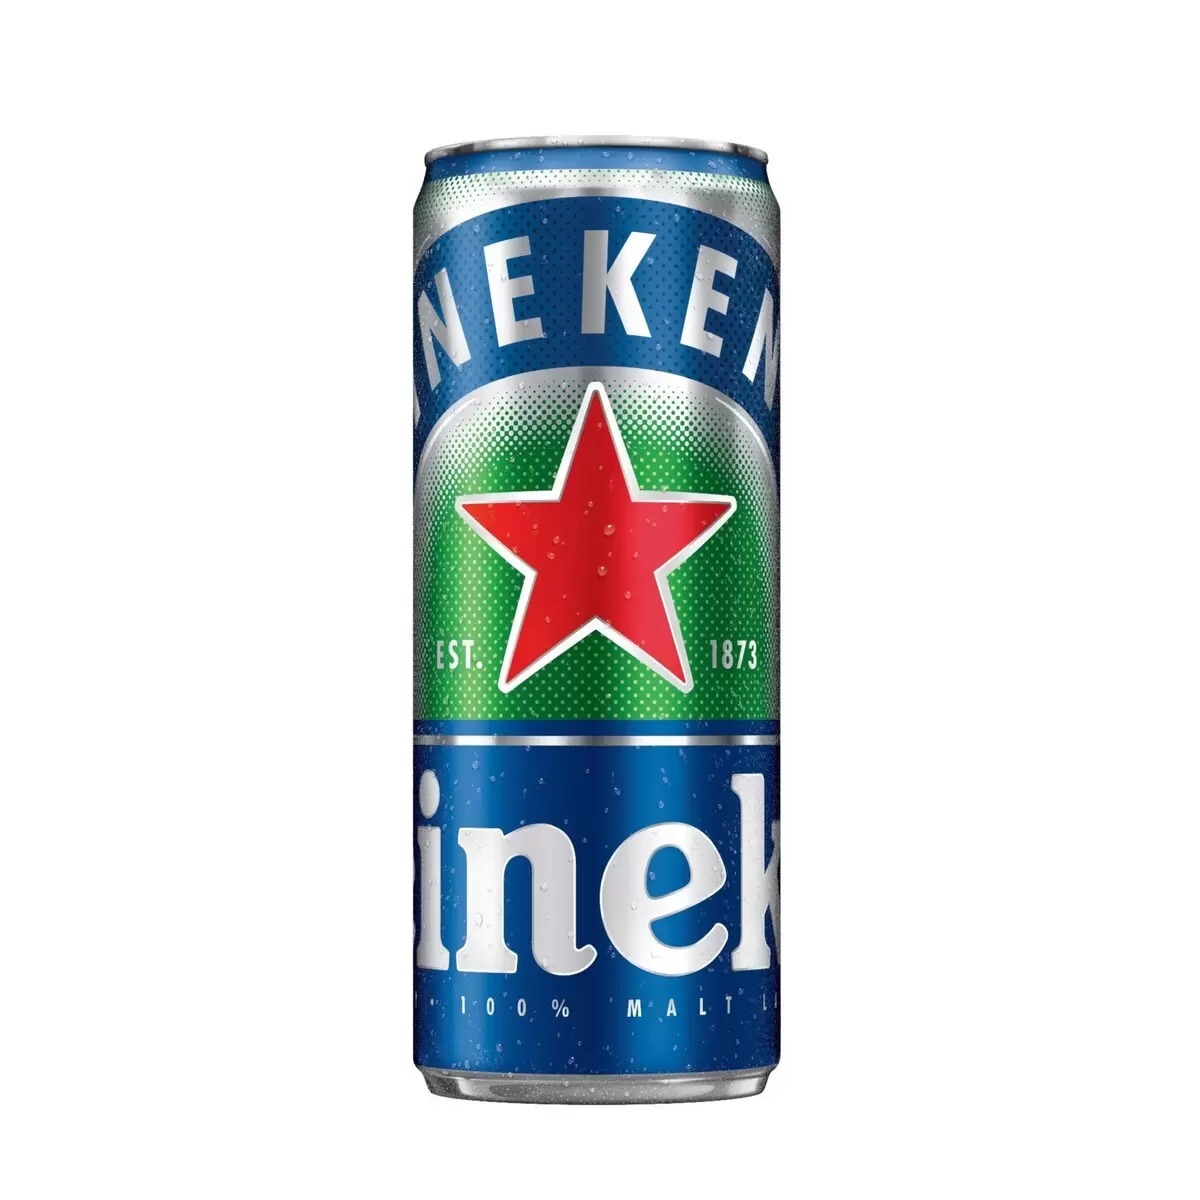  new goods #1 case 24 can set # high ne ticket 0.0 non-alcohol beer 330ml 24 can entering . alcohol made law Heineken0.0 drink drink cost ko. flower see 